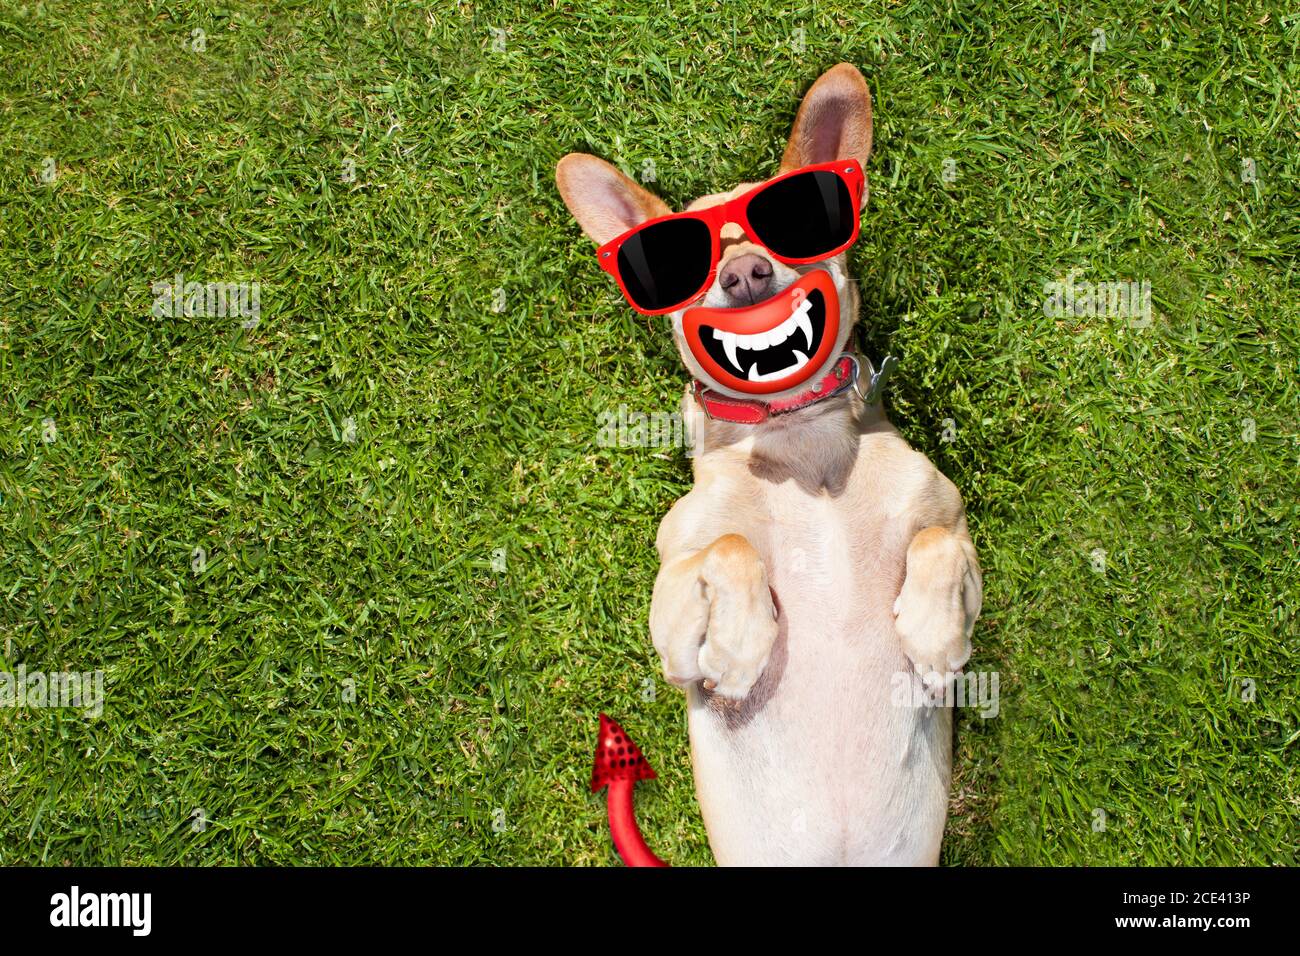 Chihuahua Scary High Resolution Stock Photography And Images Alamy